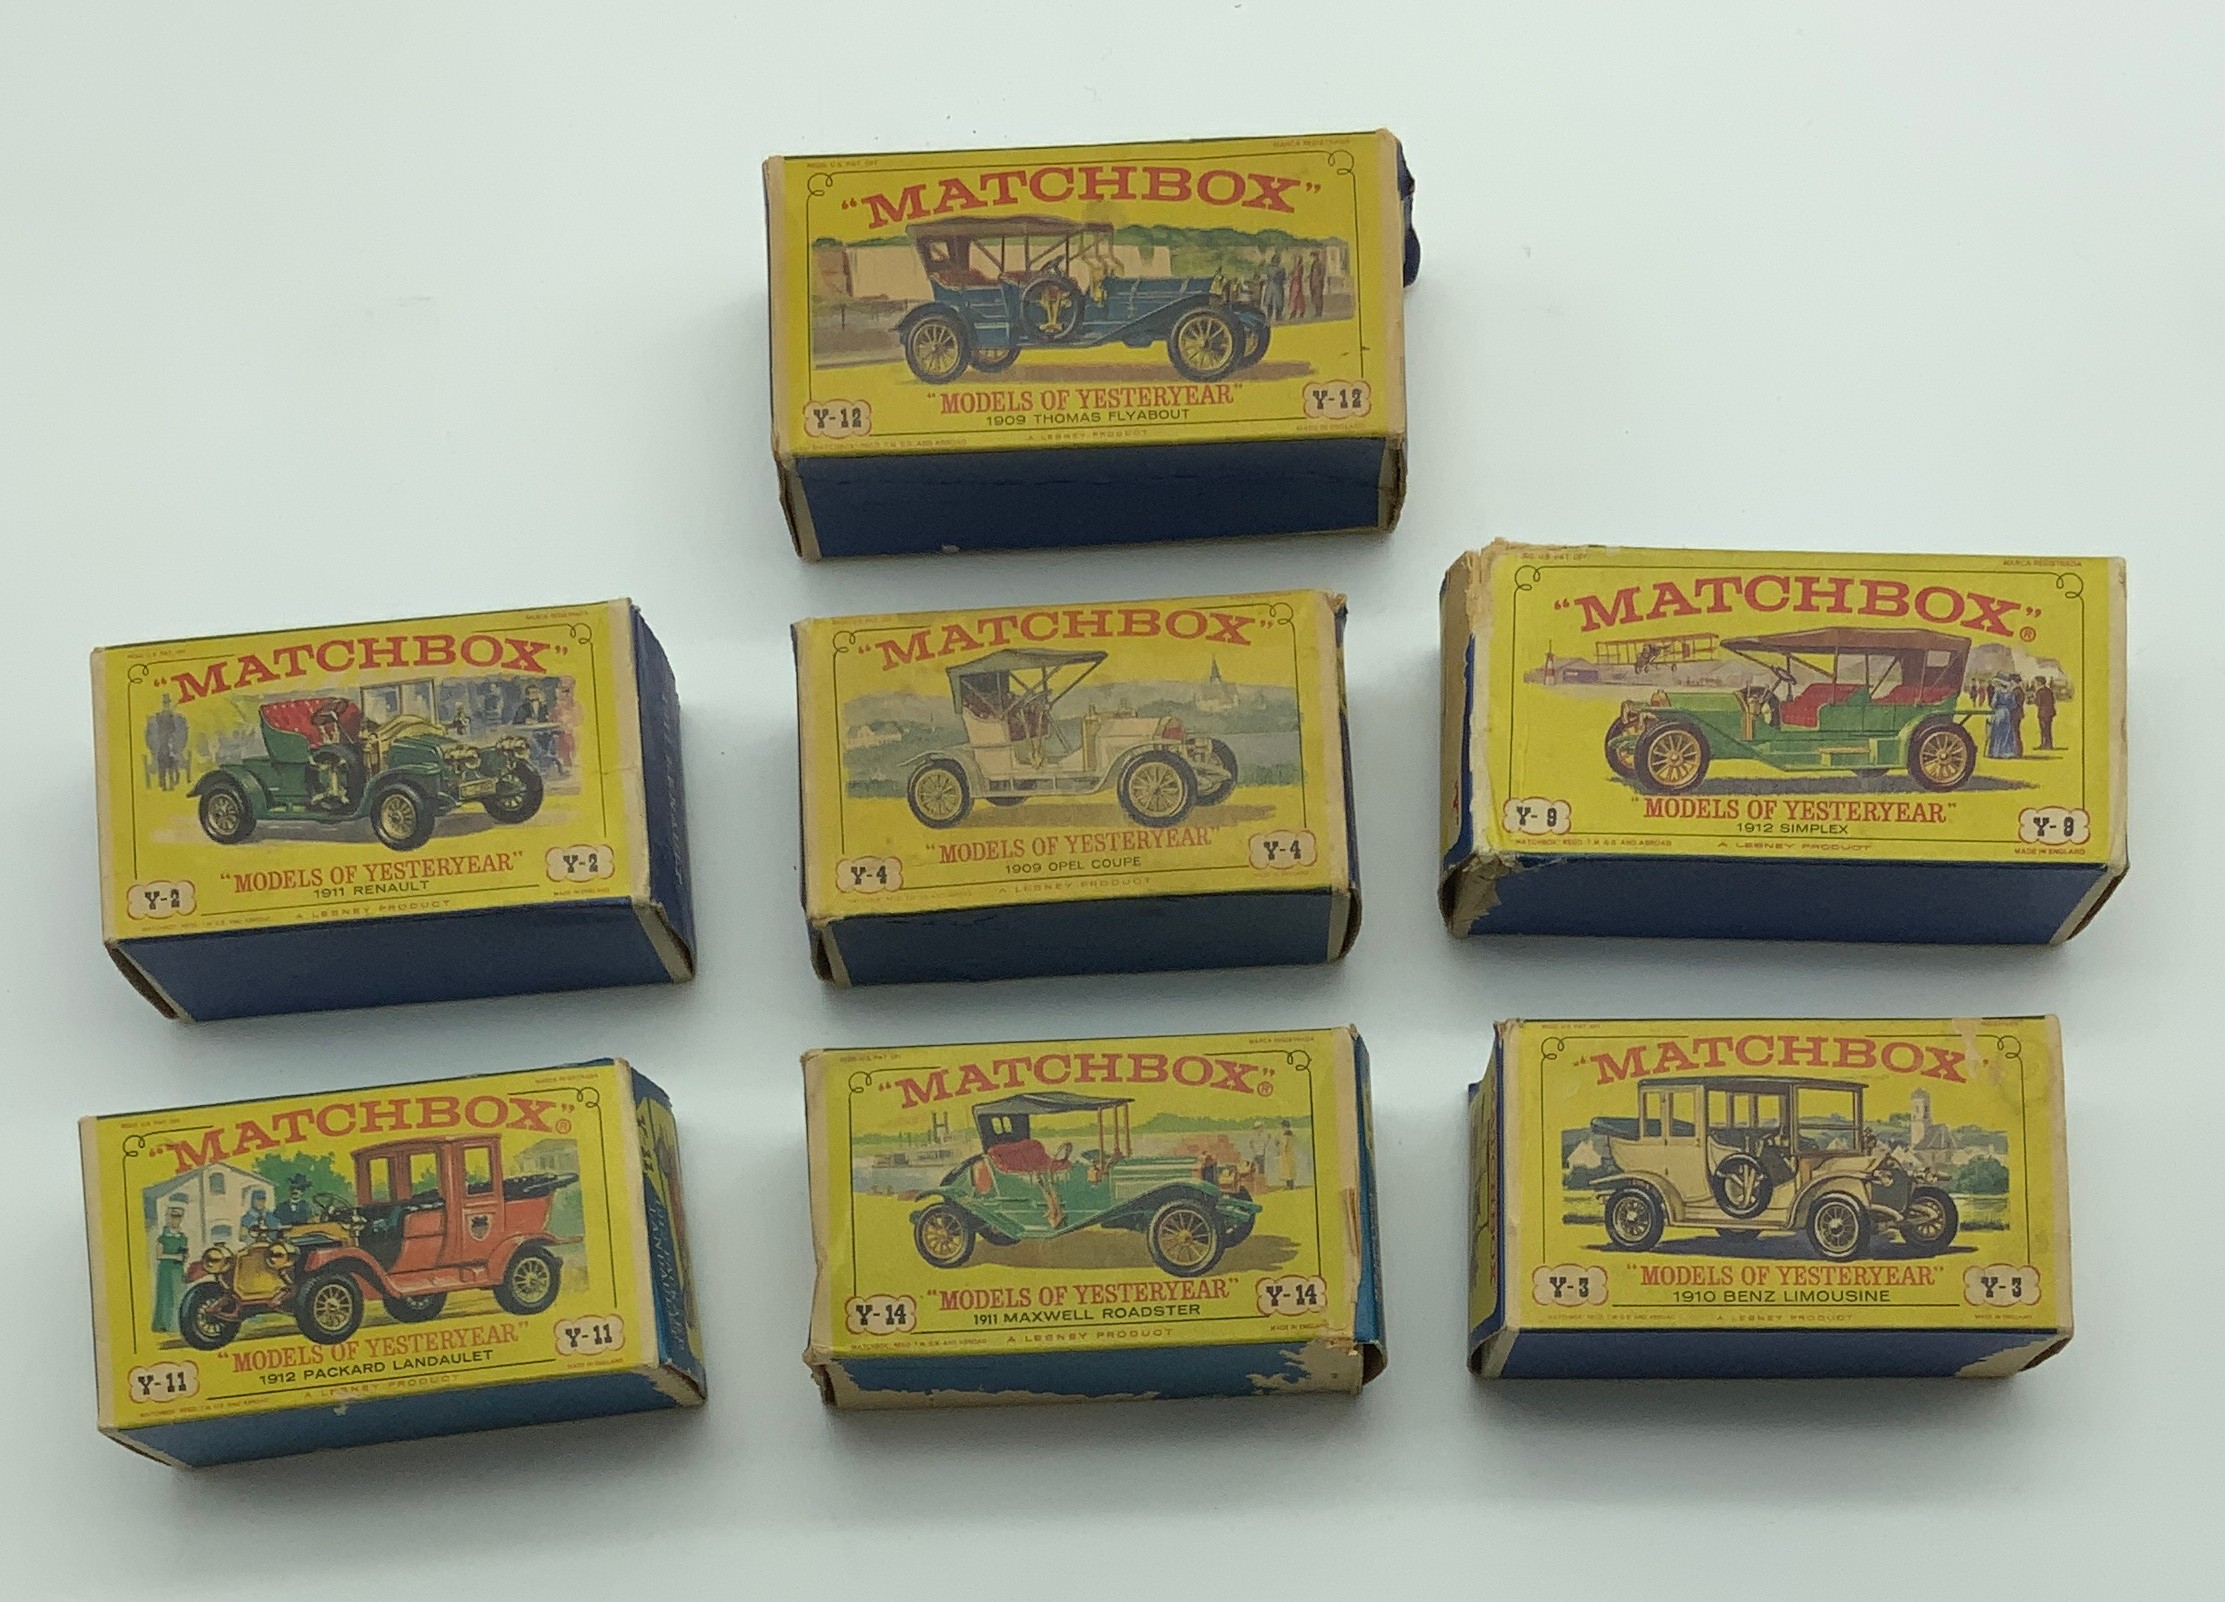 SEVEN VINTAGE CARS MATCHBOX TOYS, BOXED 1960s - Image 4 of 5